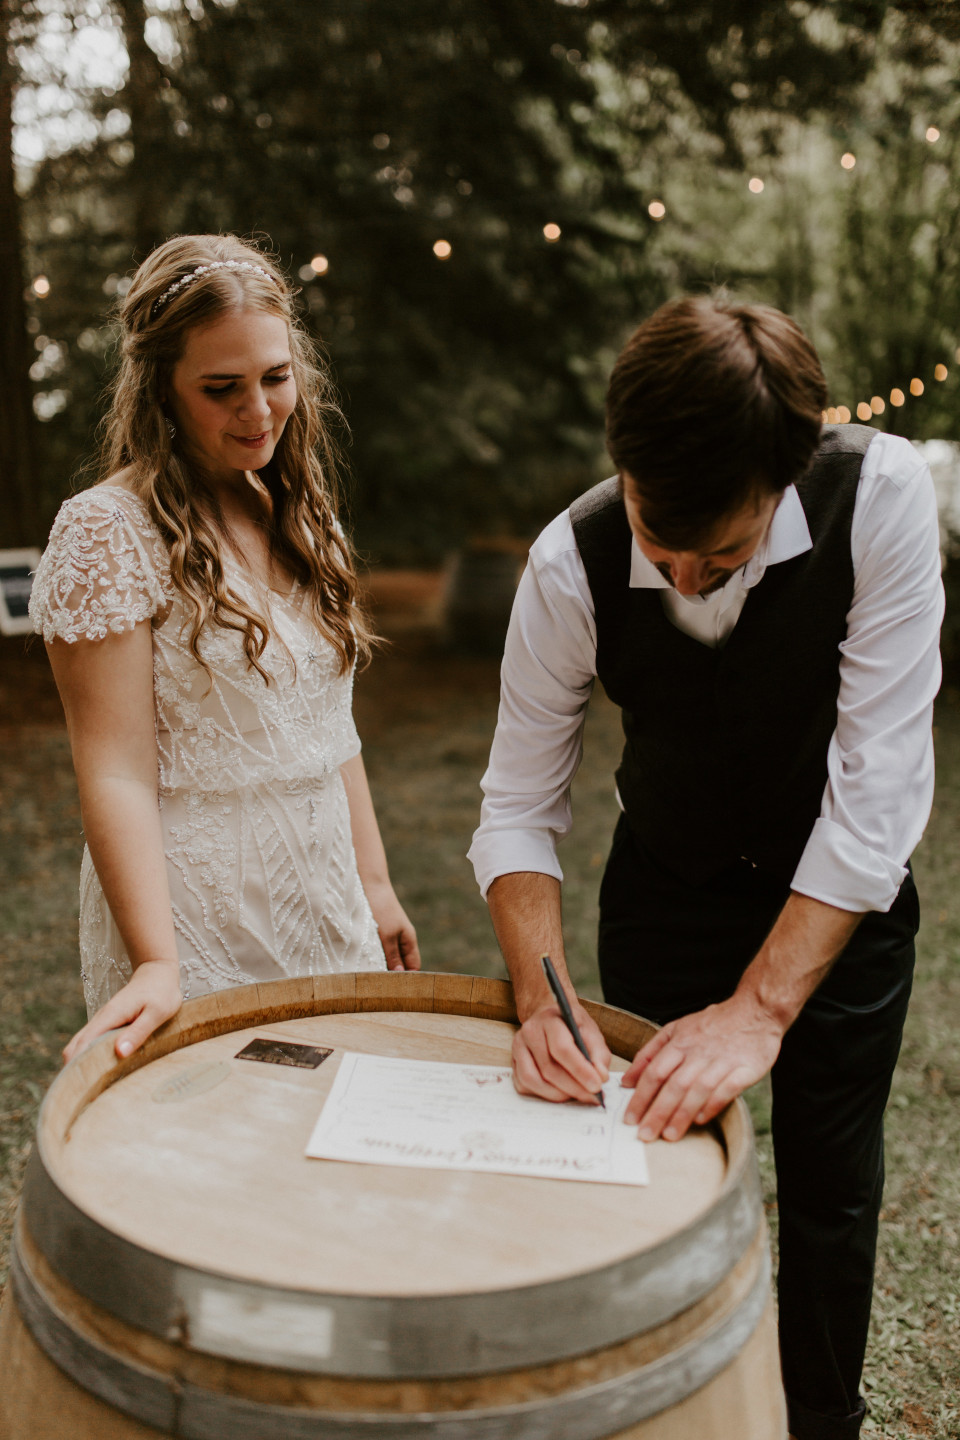 Hannah and Dan sign their marriage certificate in Corvallis, Oregon. Intimate wedding photography in Corvallis Oregon by Sienna Plus Josh.